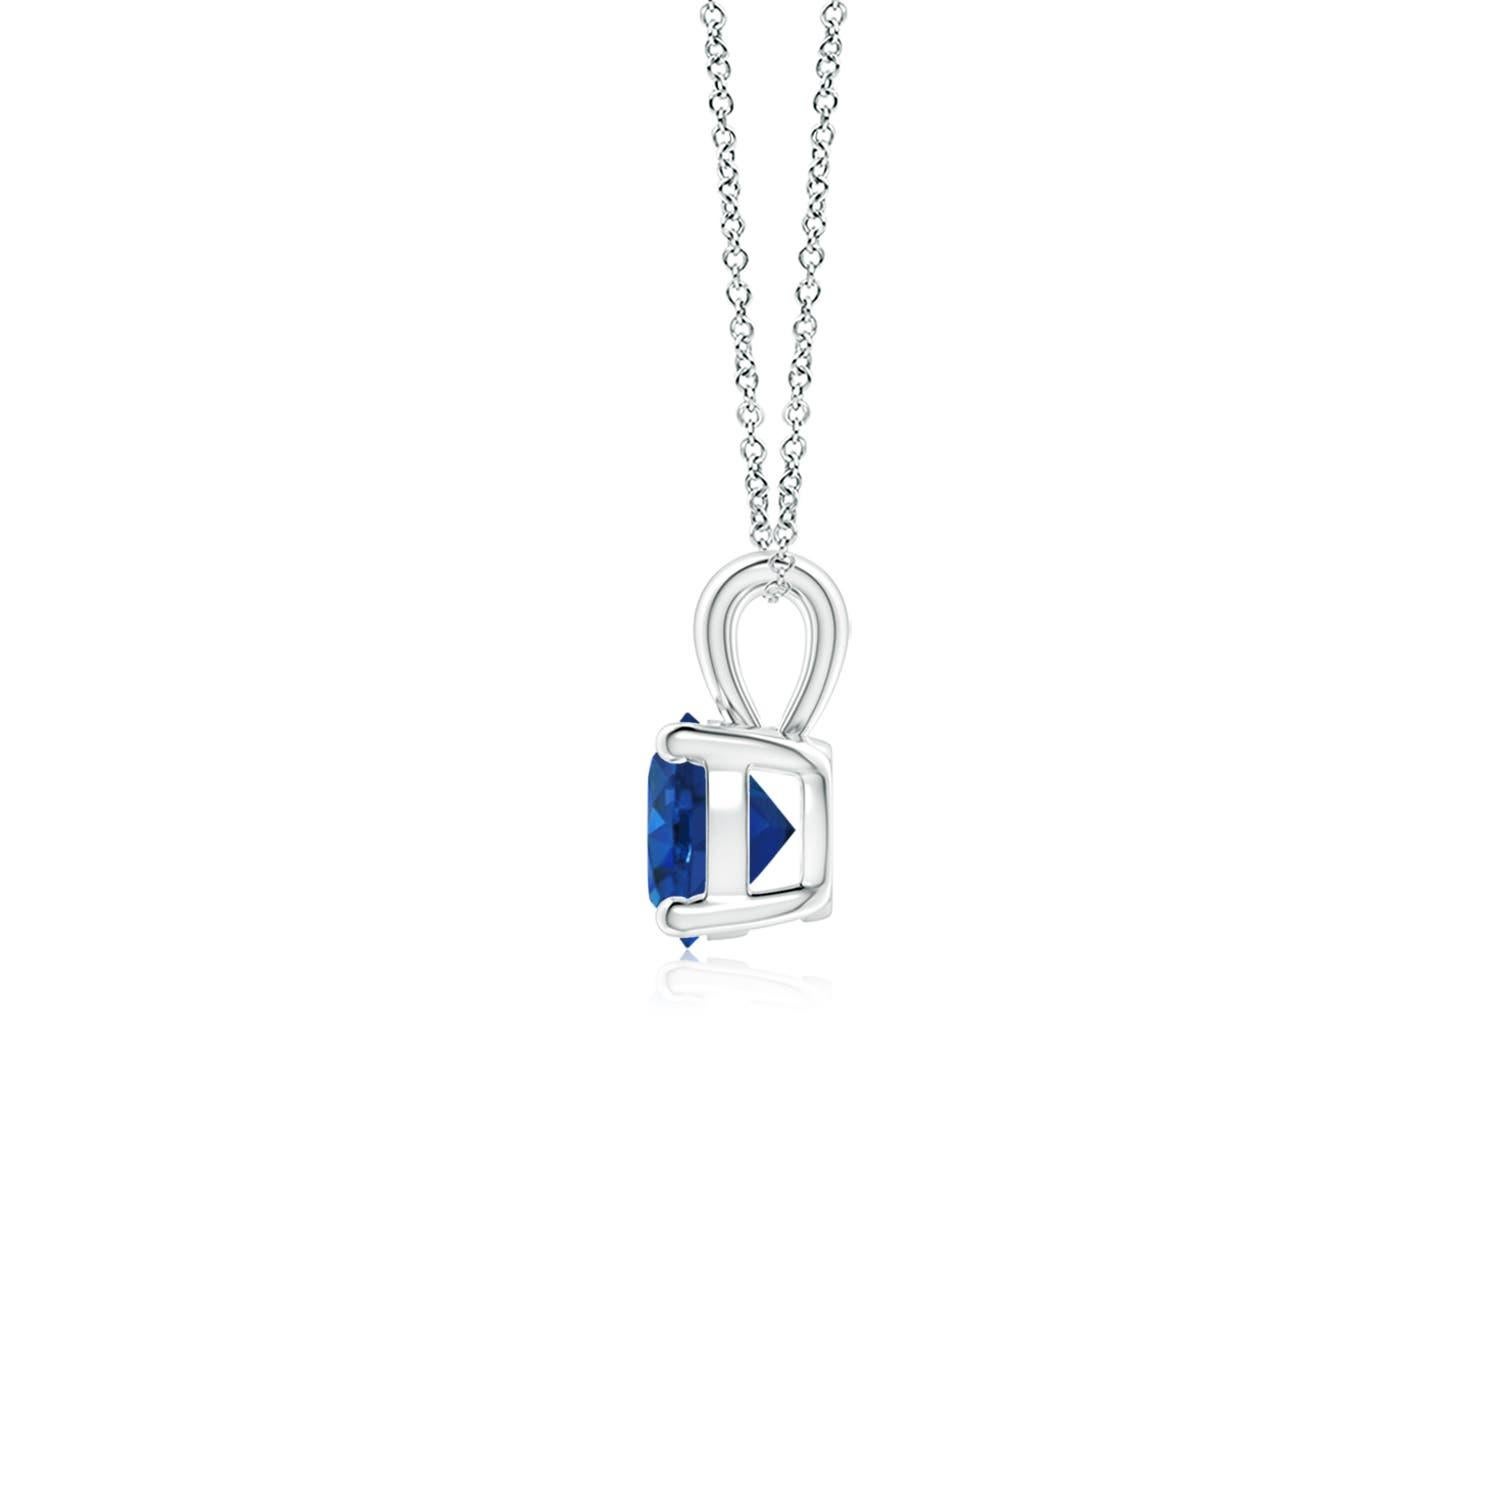 Linked to a lustrous bale is a stunning sapphire solitaire secured in a four prong setting. Crafted in 14k white gold, the elegant design of this classic sapphire pendant draws all attention towards the magnificence of the center stone.
Blue